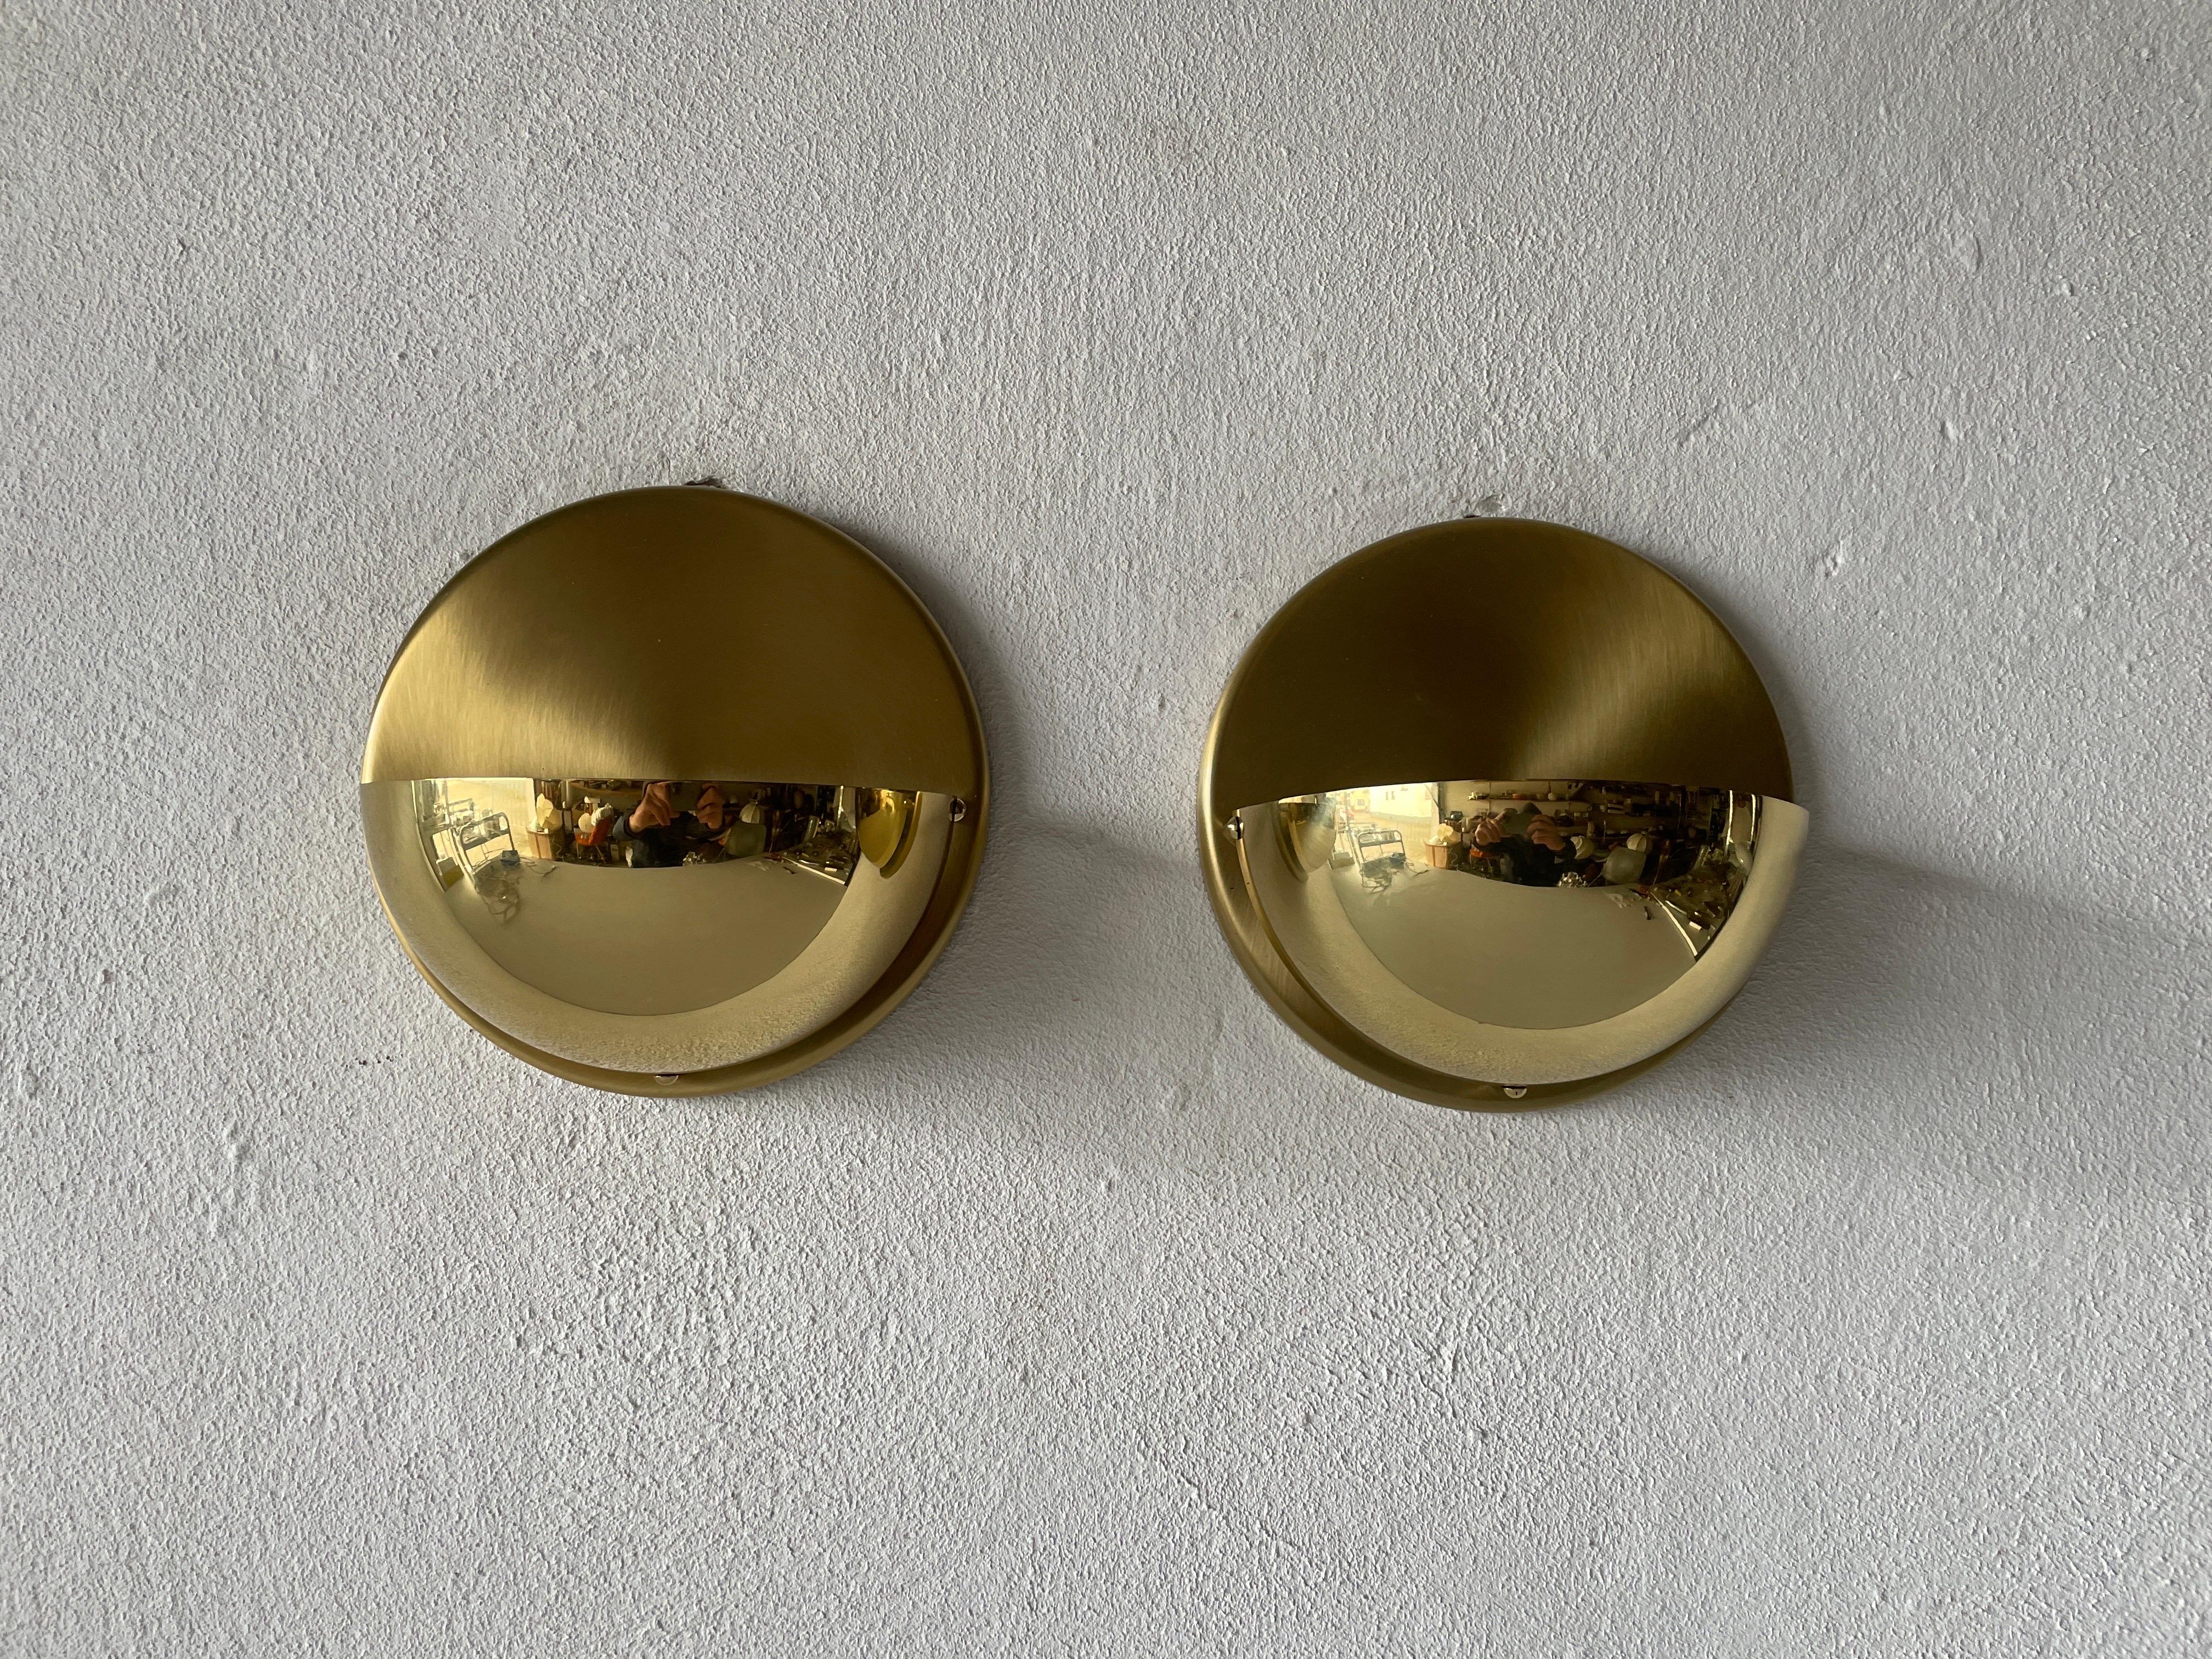 Brass pair of Sconces by Bankamp Leuchten, Arnsberg 1, 1970s, Germany.

Very elegant and Minimalist wall lamps

Lamps are in very good condition.

These lamps works with E27 standard light bulbs. 
Wired and suitable to use in all countries.